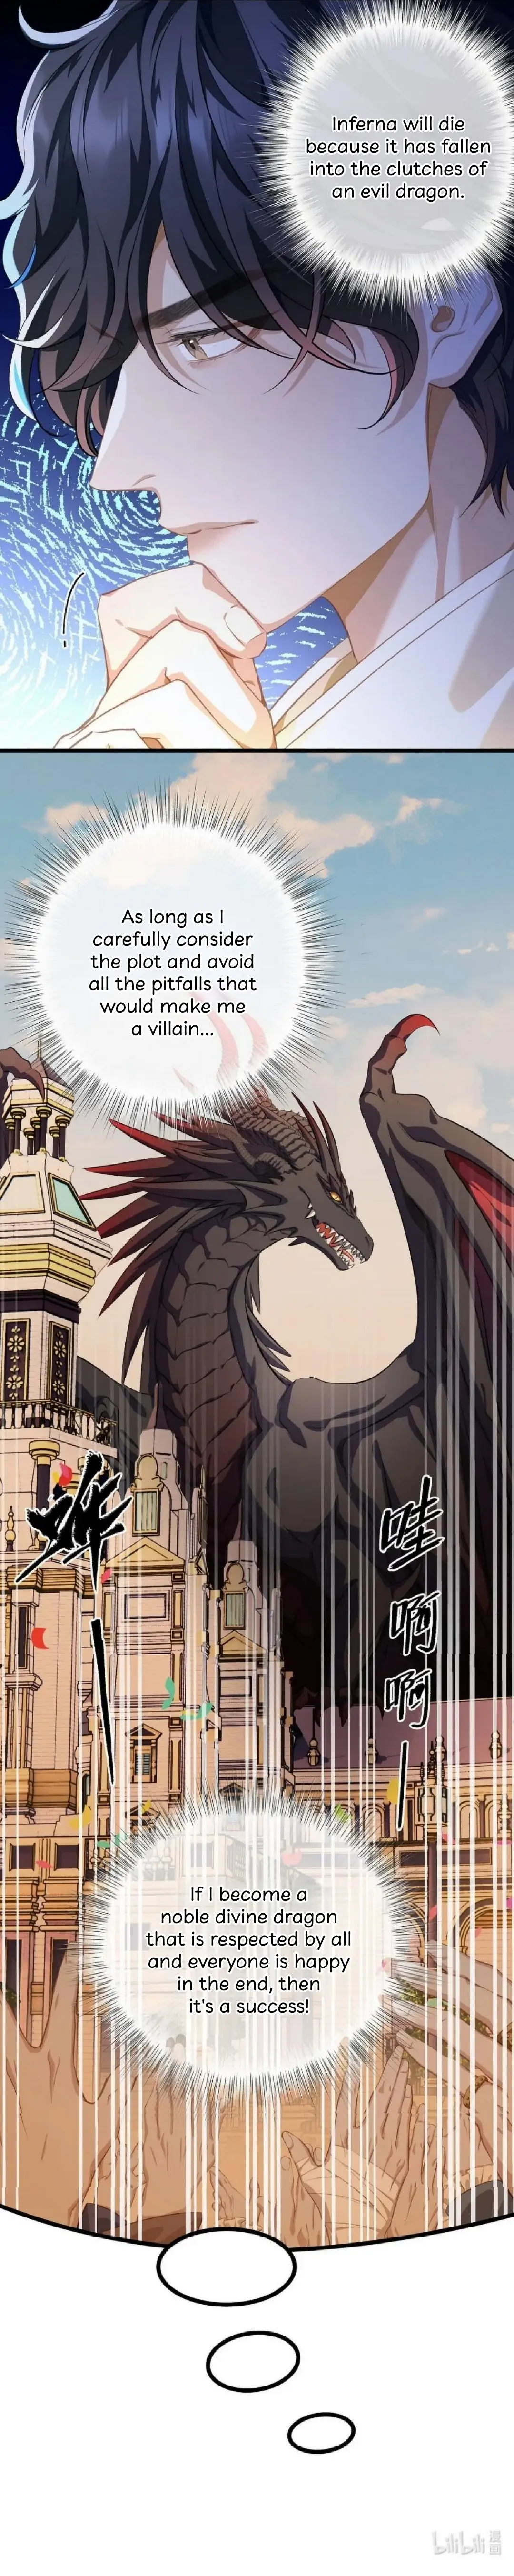 I Was Reborn as His Highness the Prince’s Little Evil Dragon chapter 2